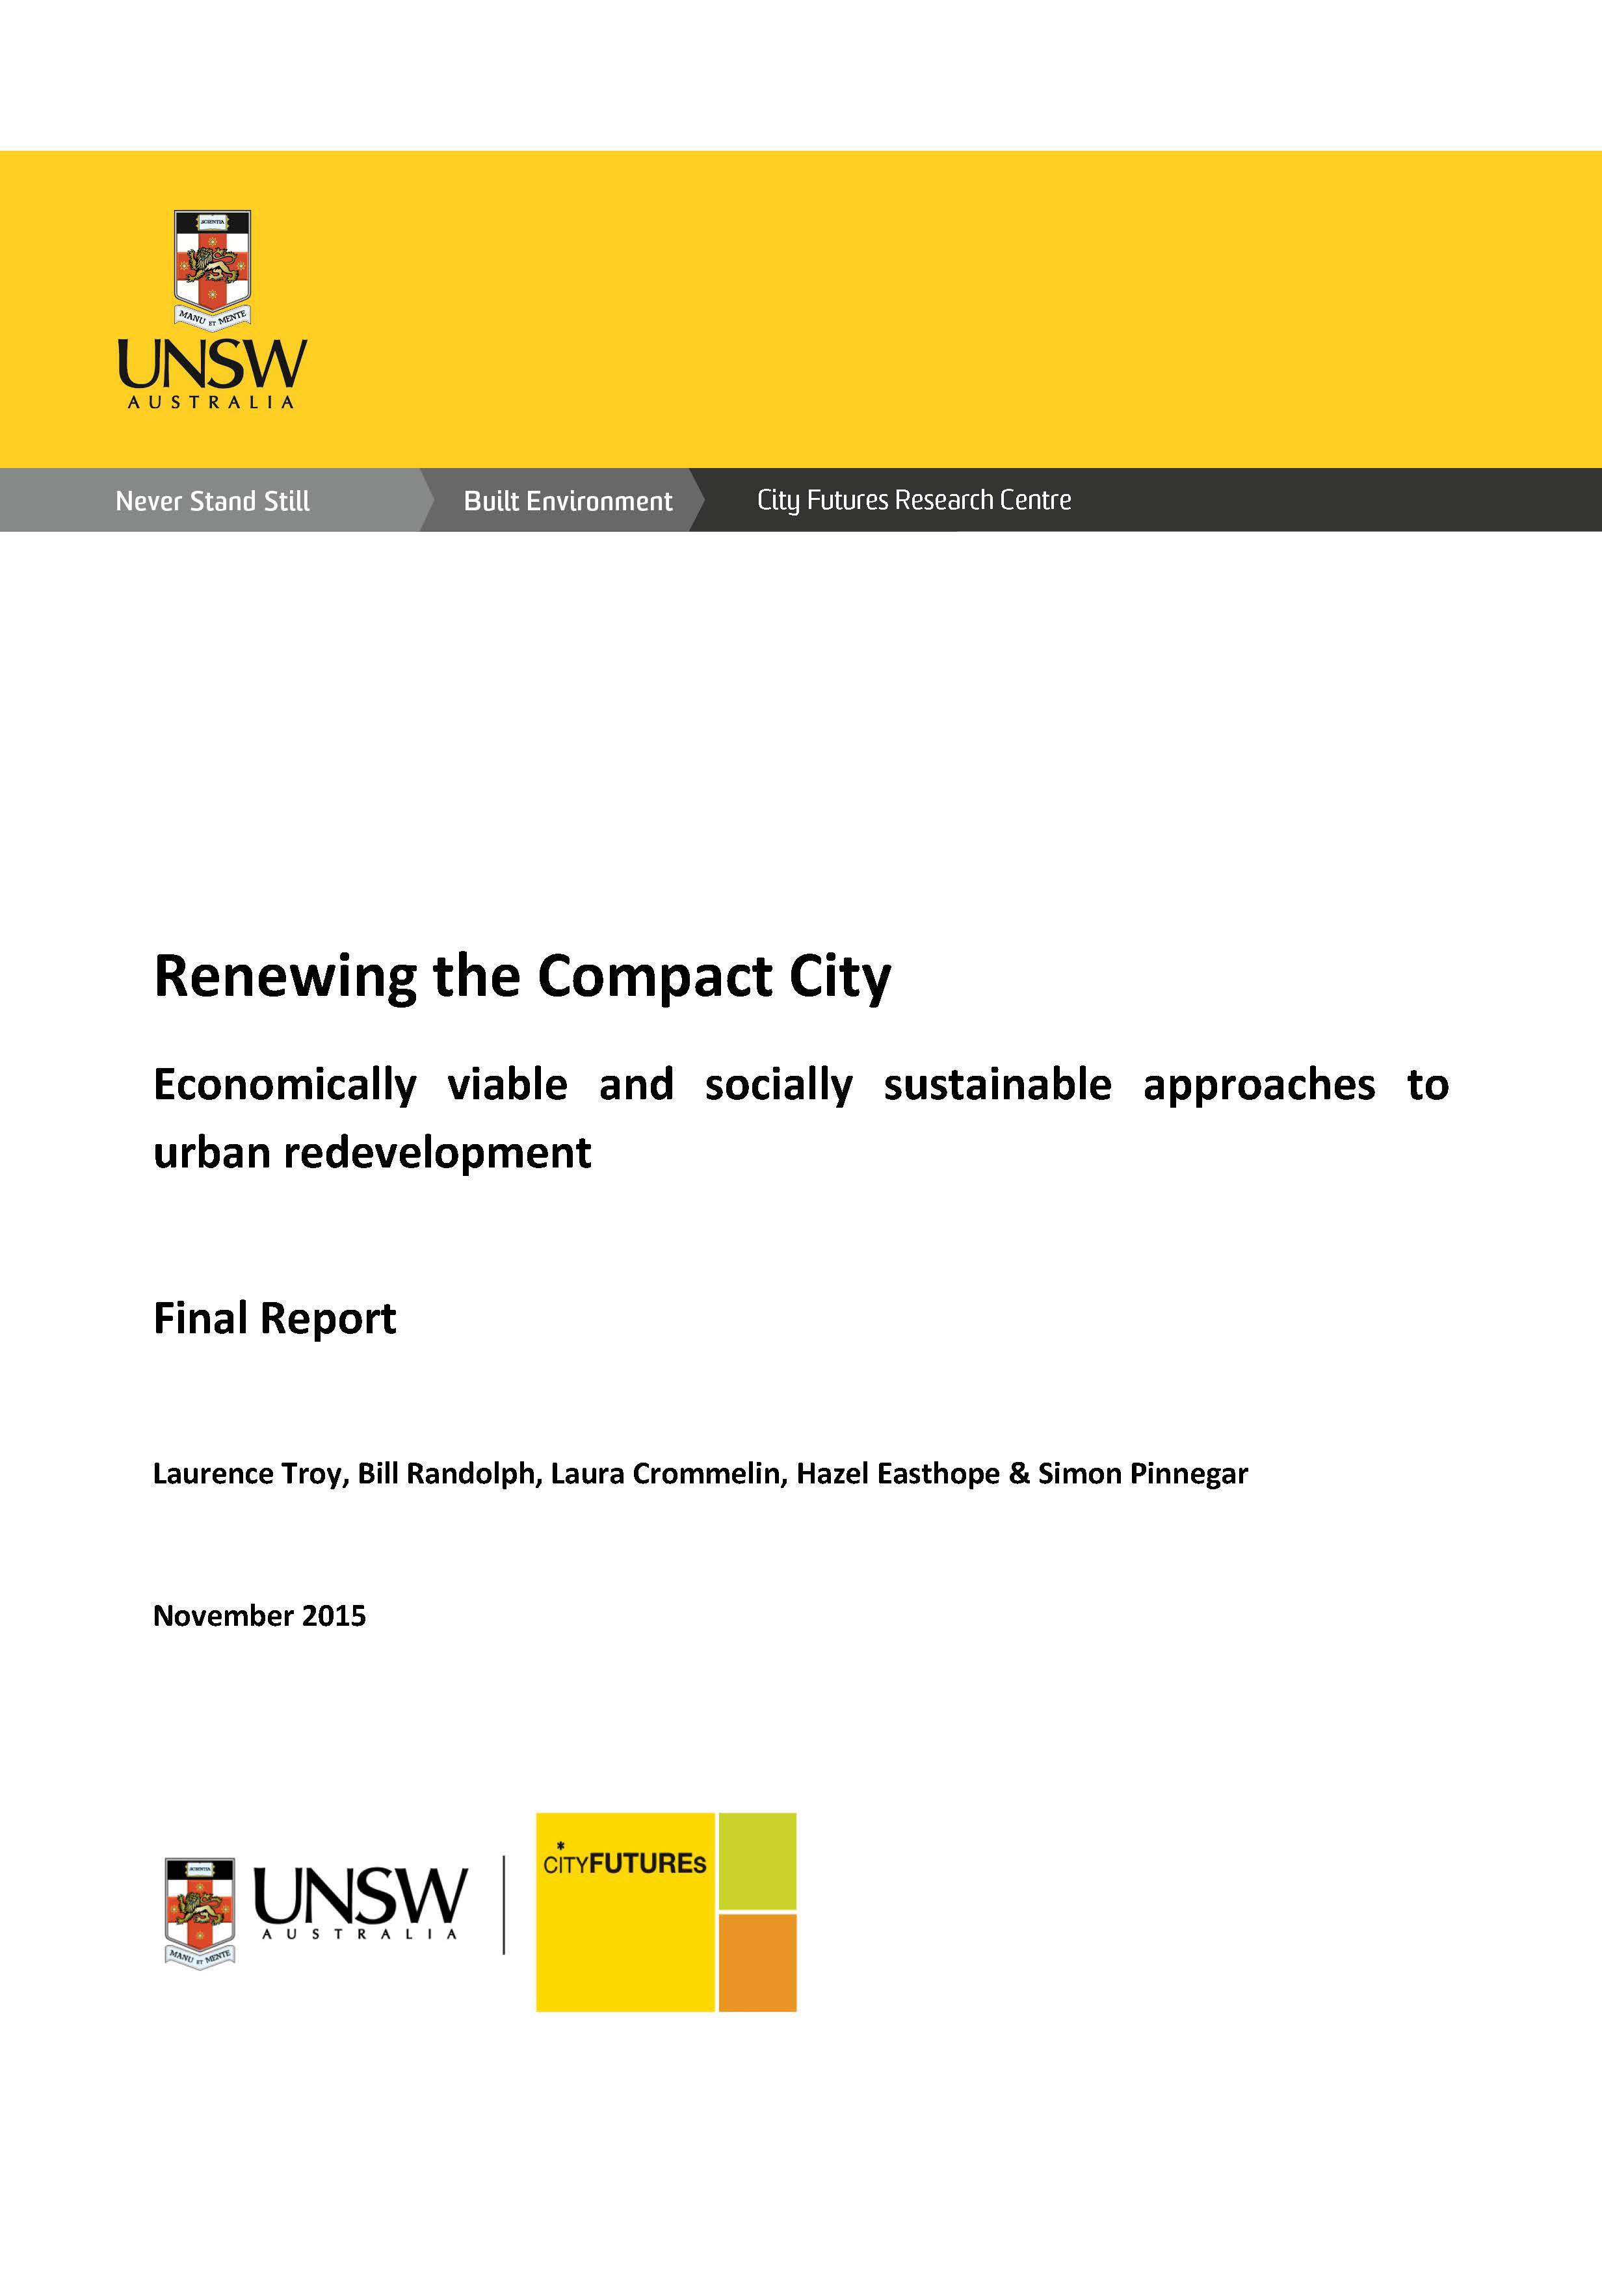 https://cityfutures.be.unsw.edu.au/media/images/Pages_from_Renewing_the_Compact_City_-_Final_Re.original.jpg